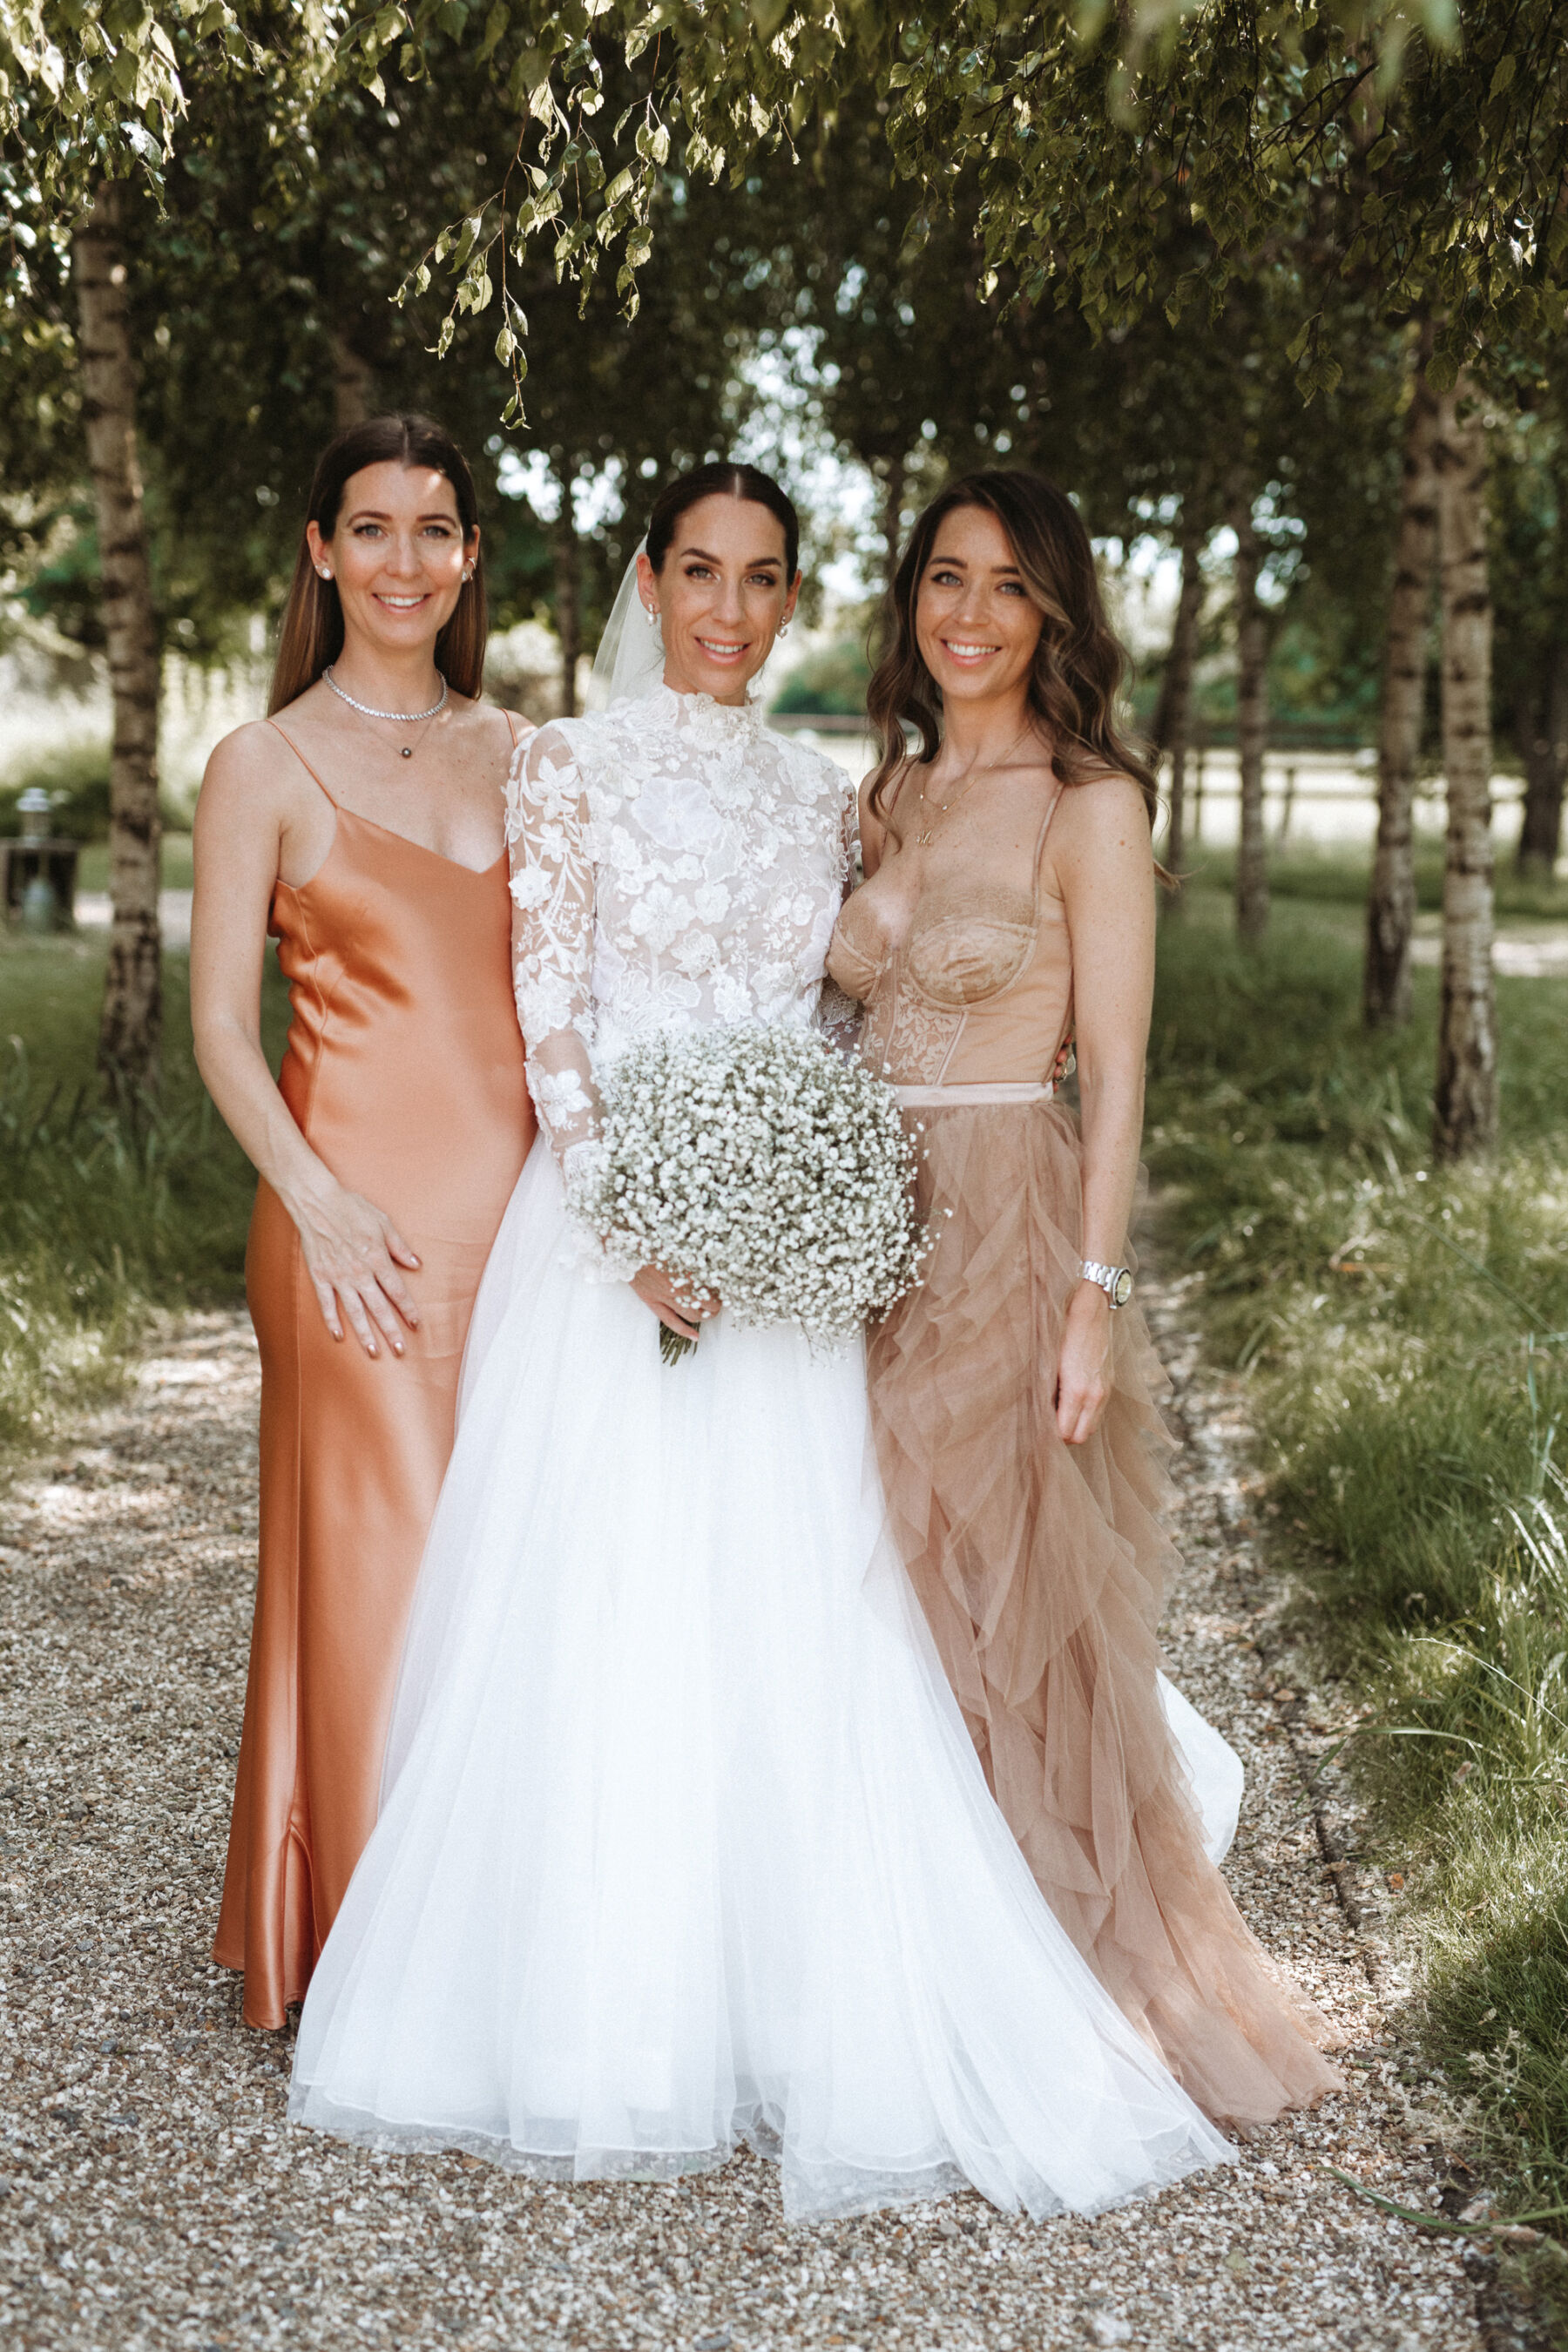 J Andreatta wedding dress and bridesmaids in peach. Tythe Barn wedding venue, The Cotswolds.